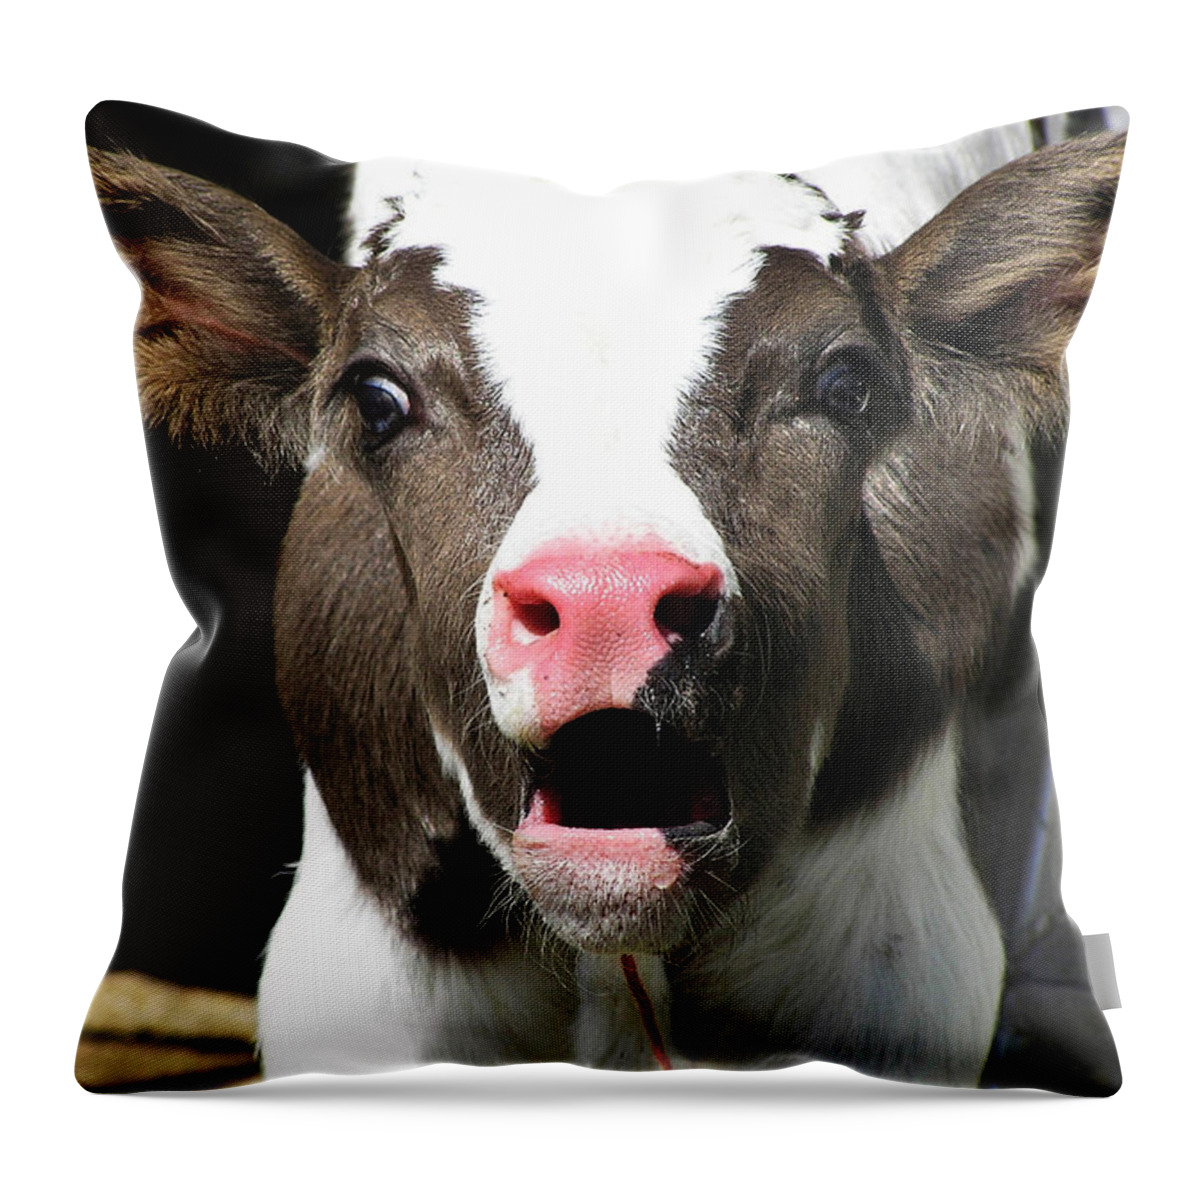 Cow Throw Pillow featuring the photograph Dairy Cow by Christina Rollo